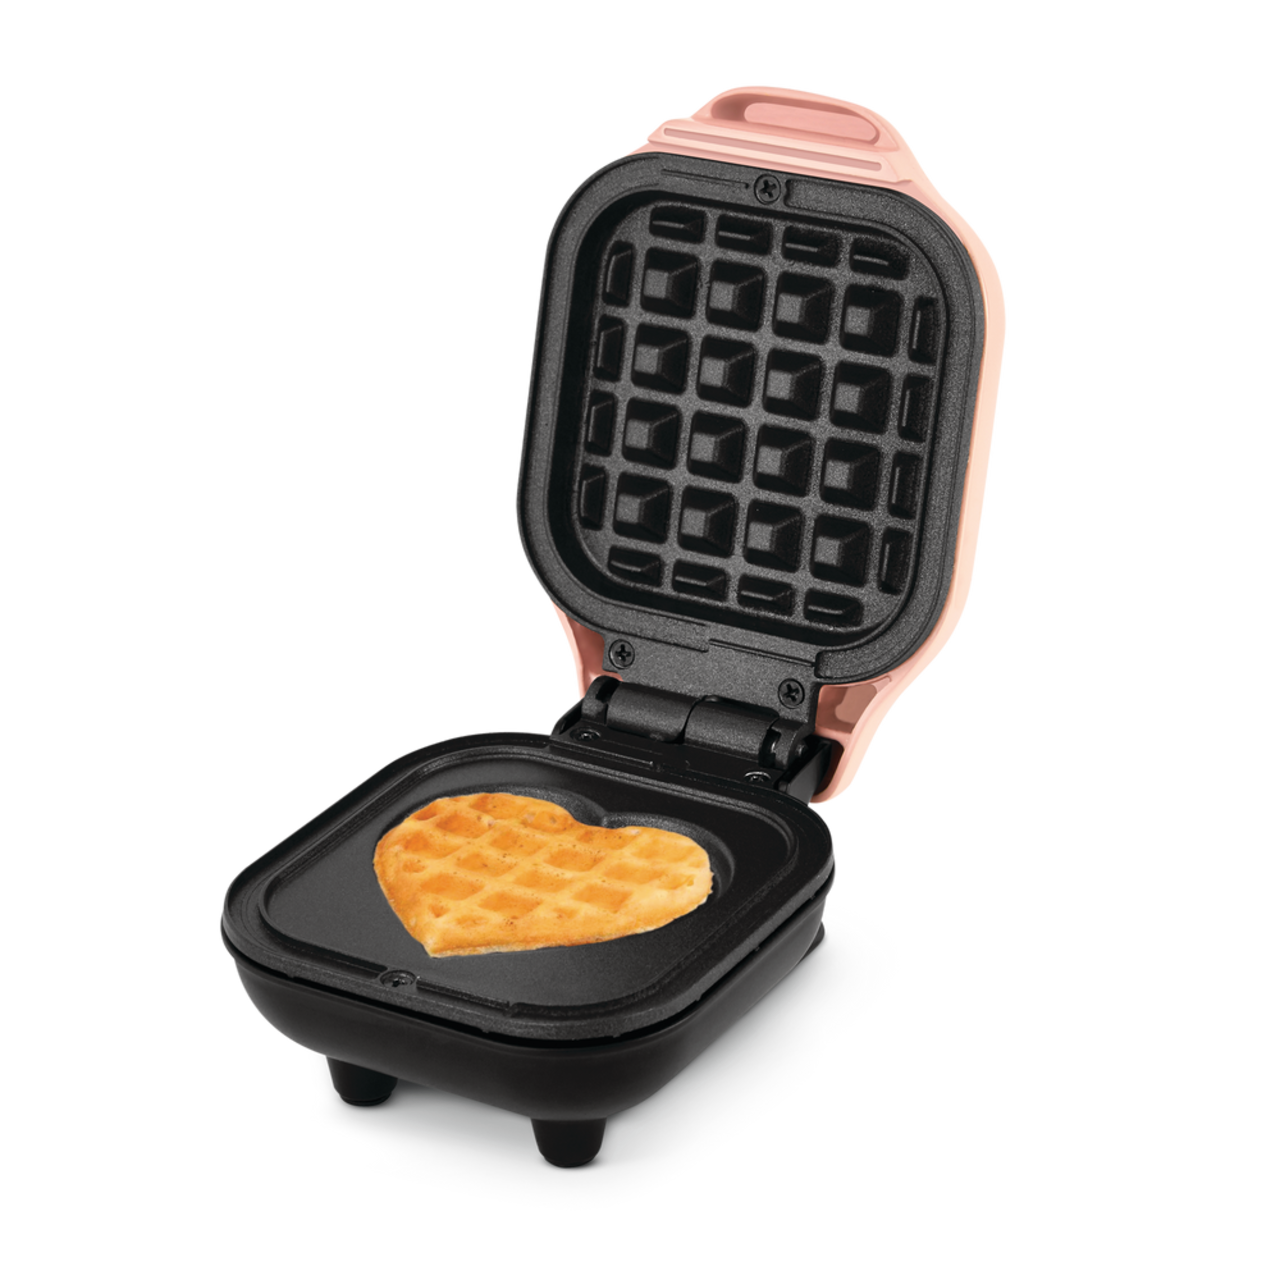 https://media-www.canadiantire.ca/product/living/kitchen/kitchen-appliances/0437063/rise-by-dash-heart-mini-waffle-maker-8479145c-d096-4738-8869-b69383ff54cb.png?imdensity=1&imwidth=640&impolicy=mZoom